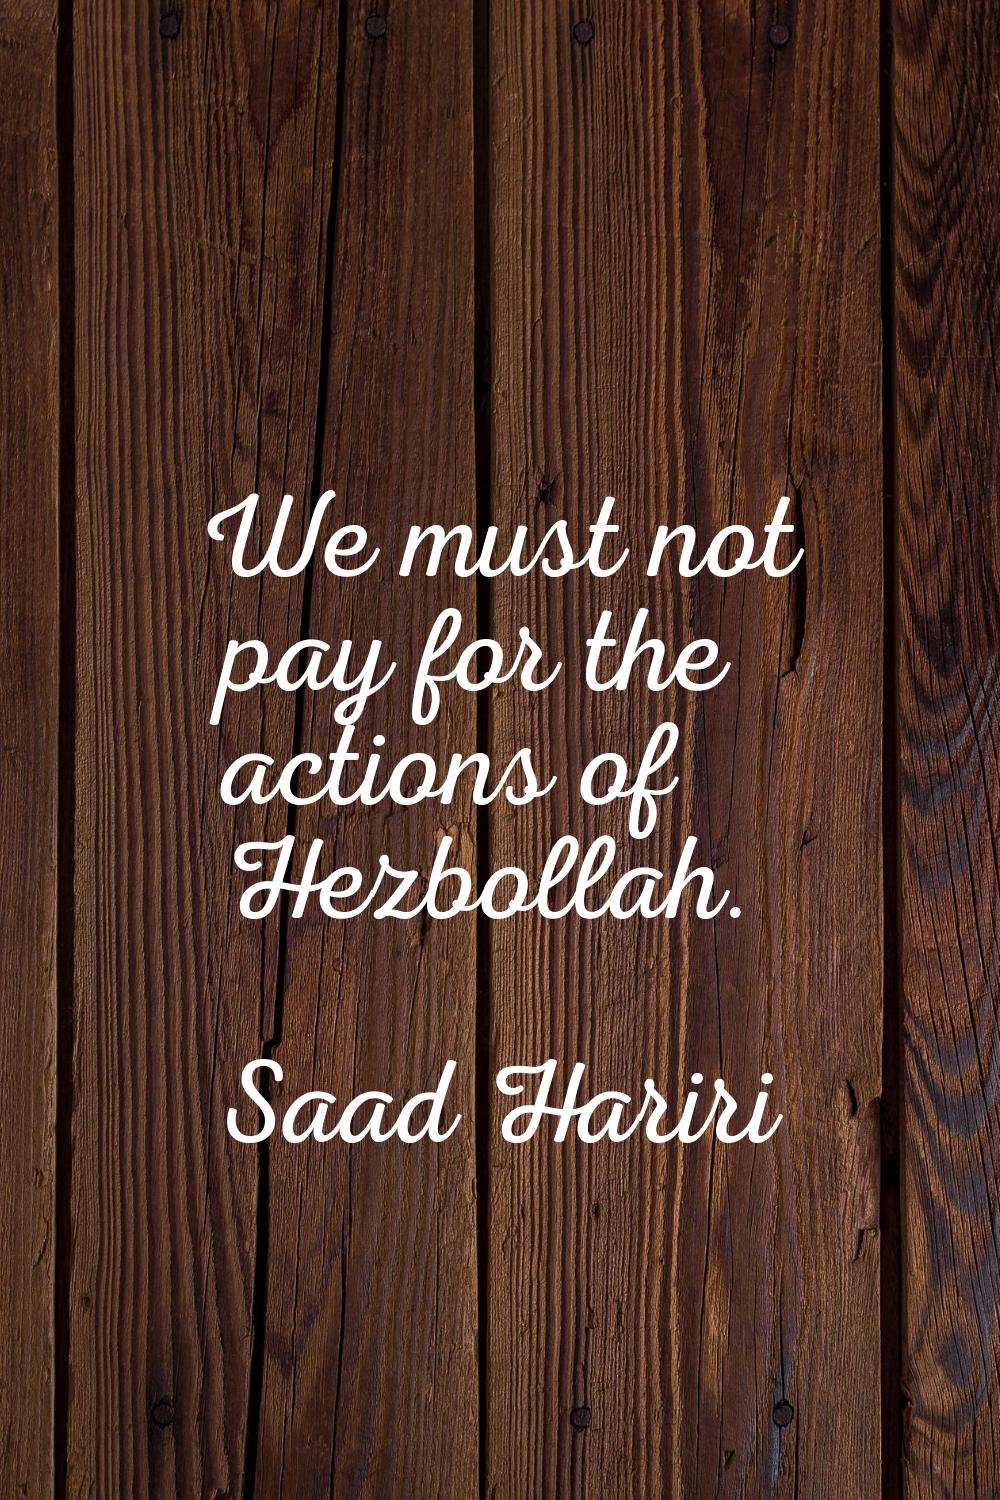 We must not pay for the actions of Hezbollah.